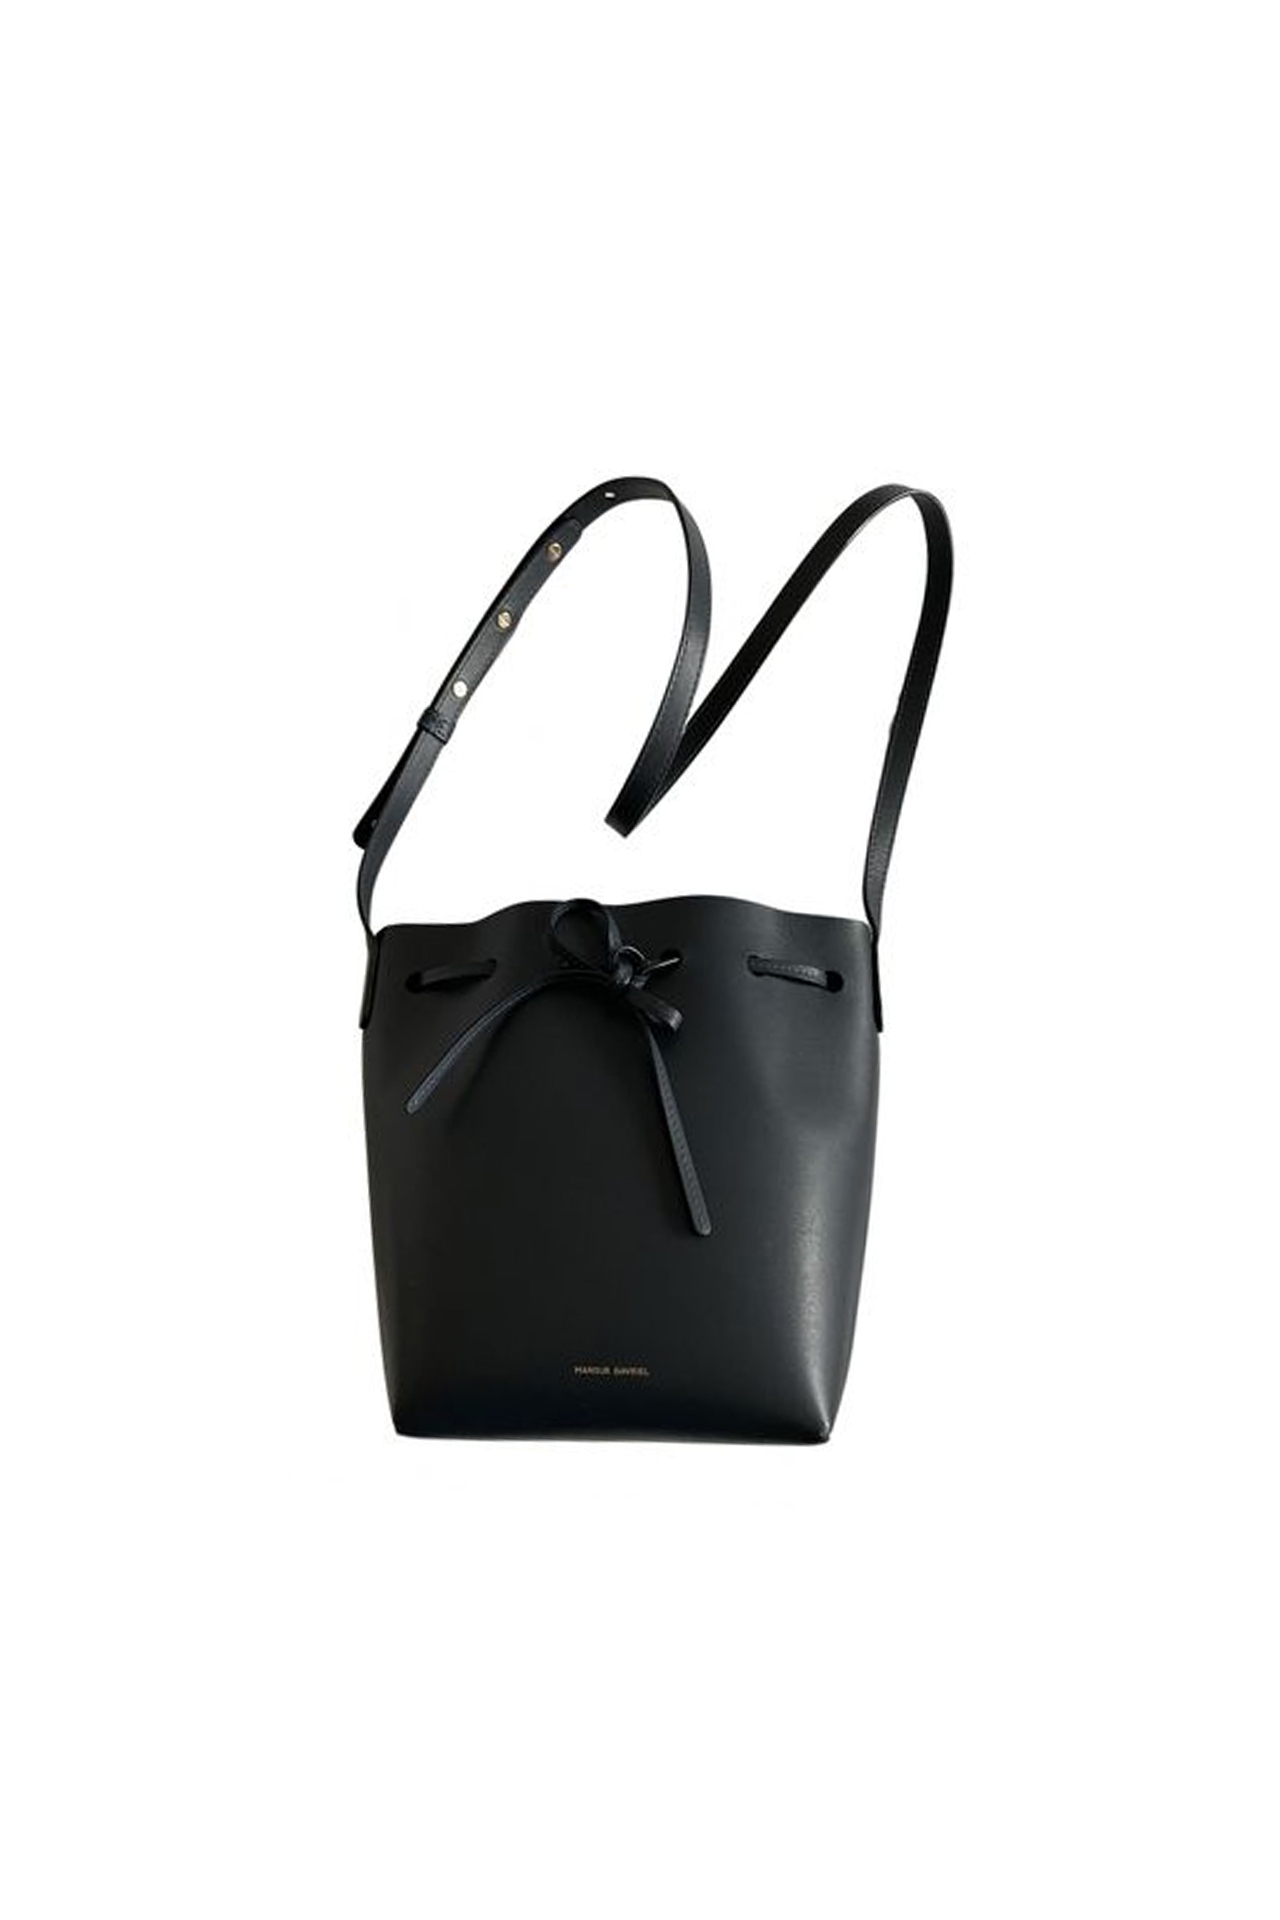 The Best Looking Bucket Bags - The Zhush